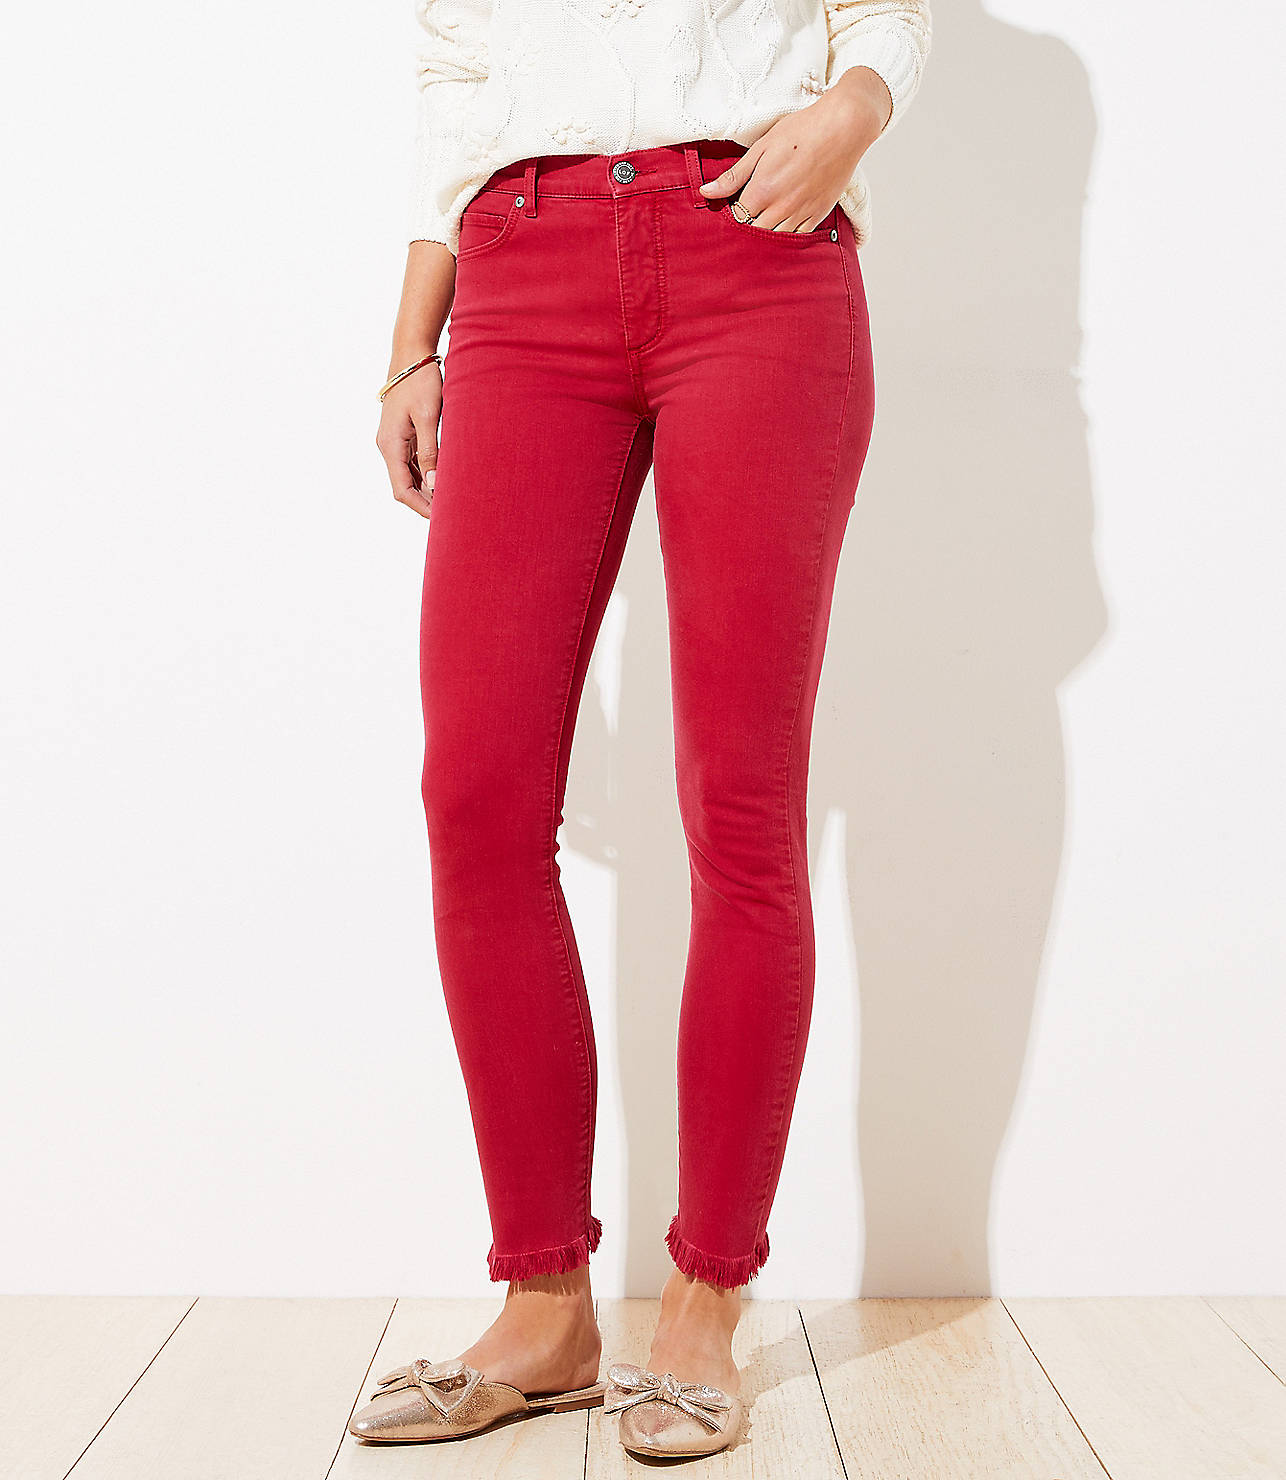 Petite Frayed Skinny Jeans in Rio Red